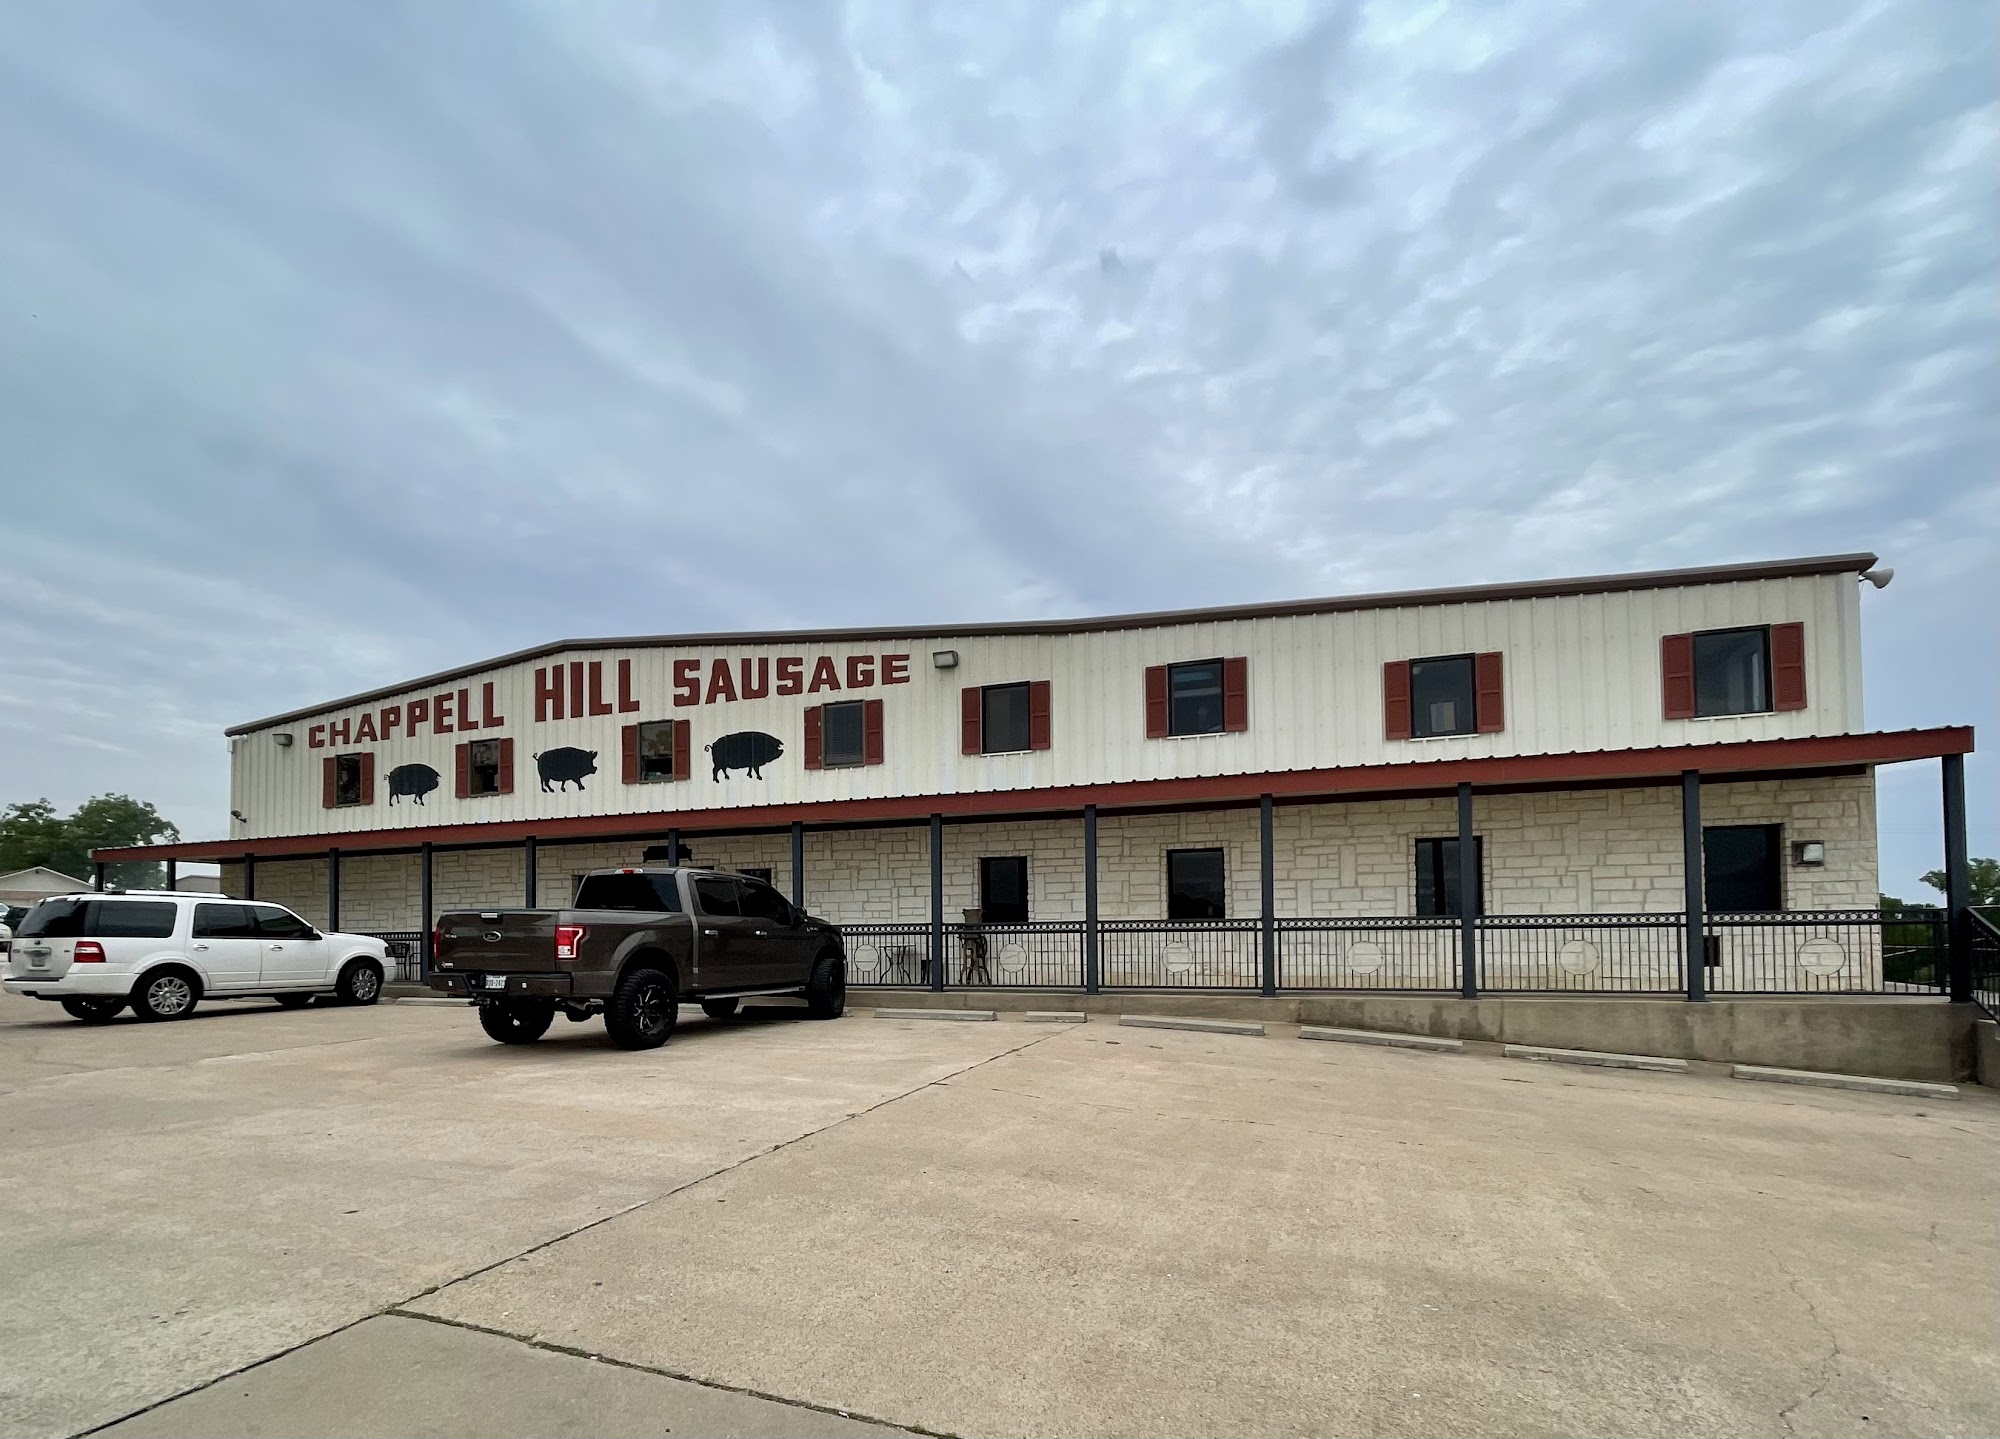 Chappell Hill Sausage Company